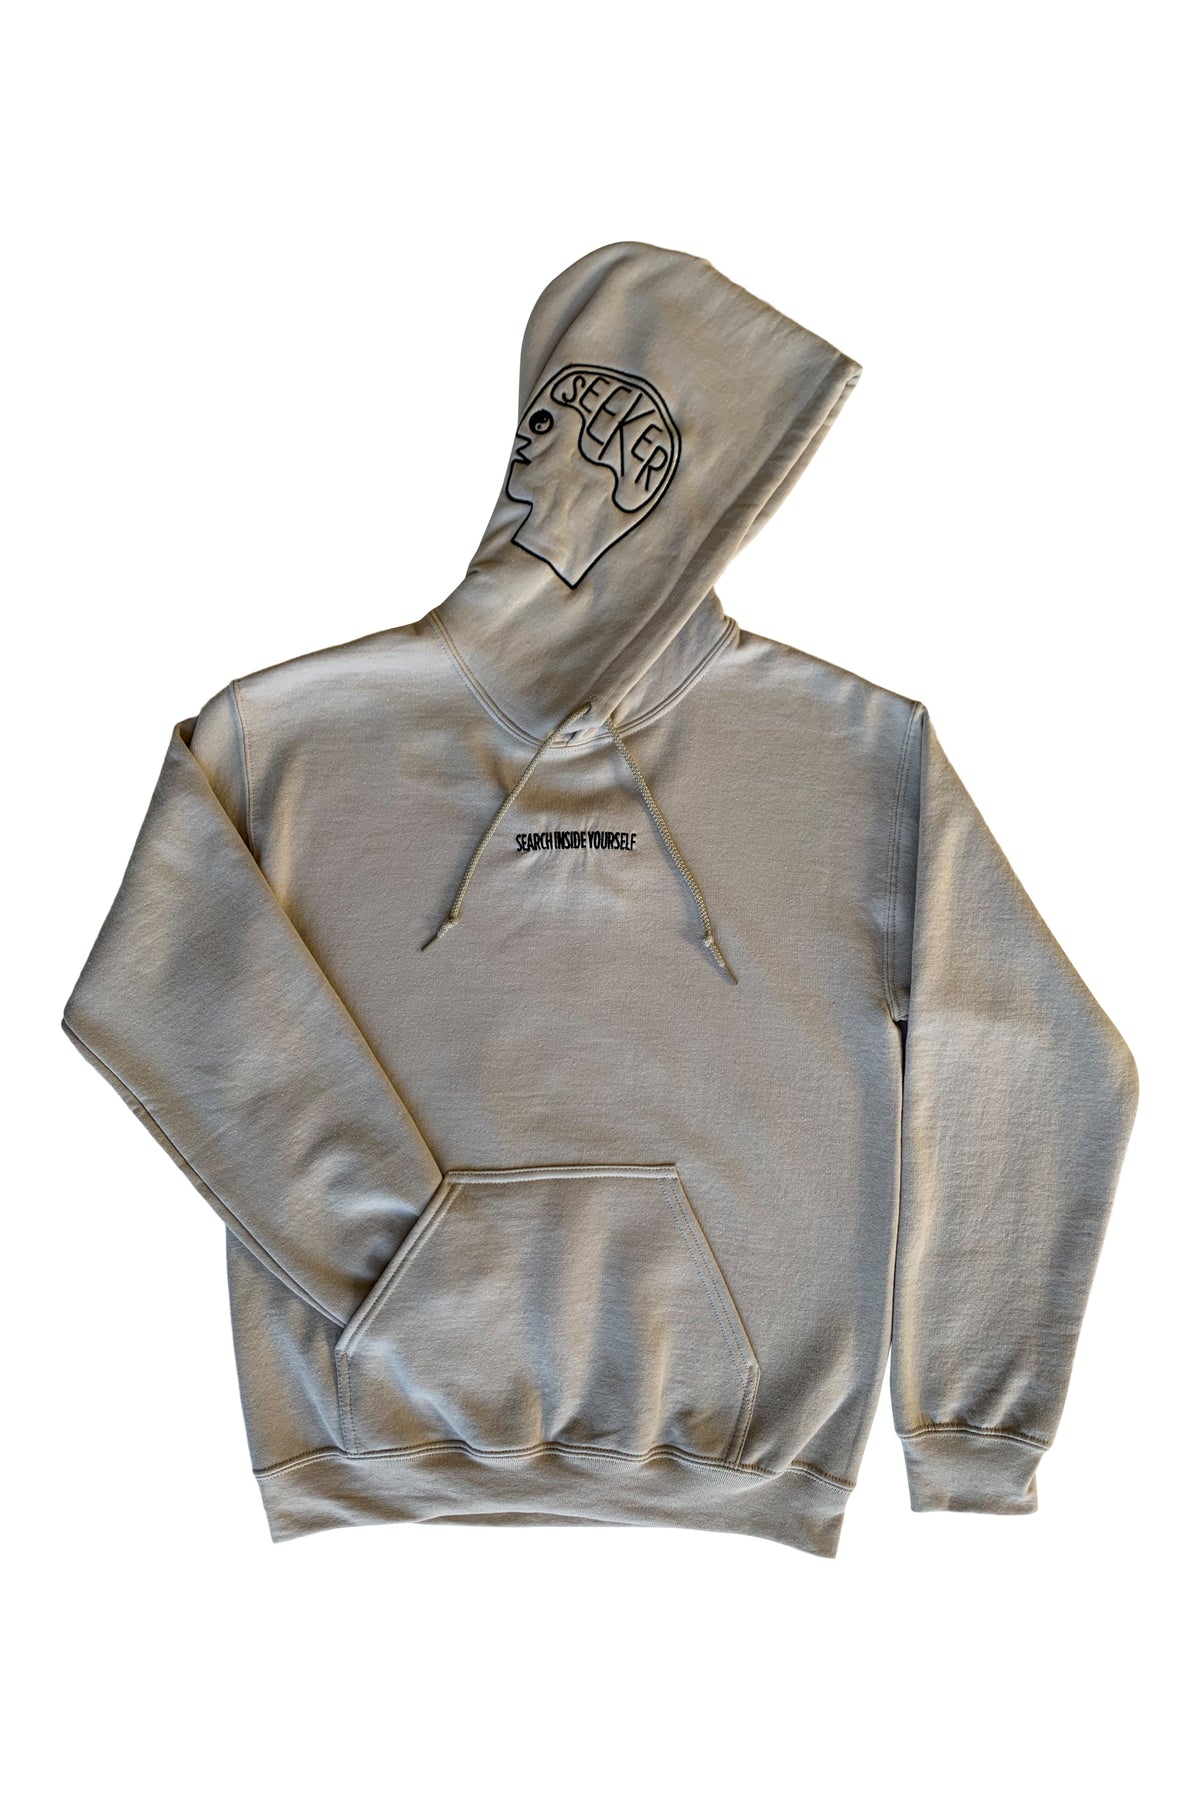 Search Inside Yourself Hoodie